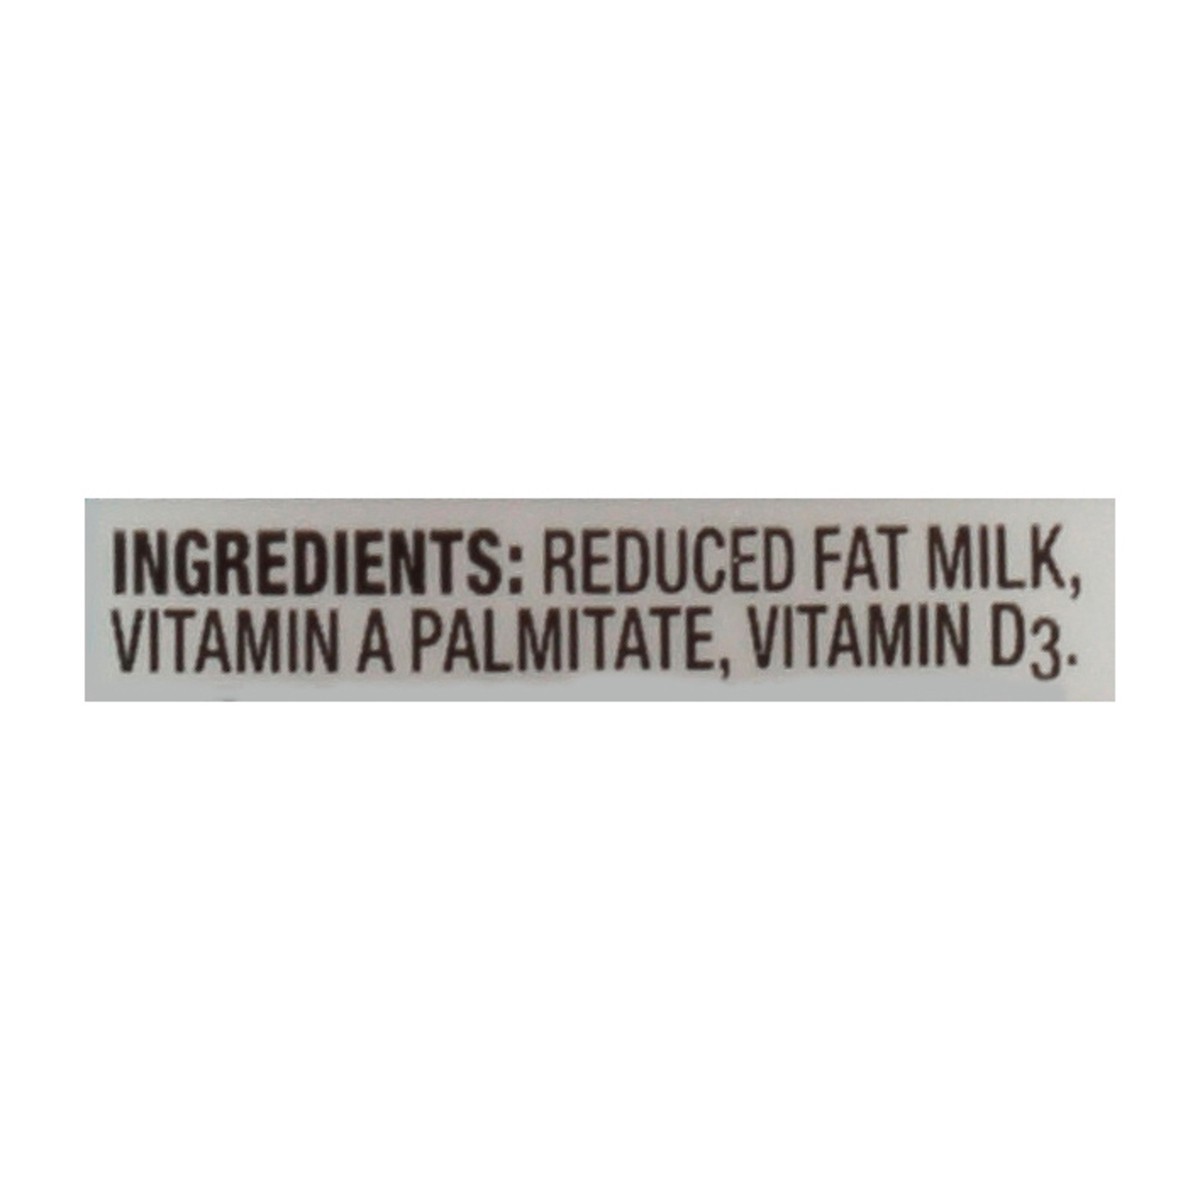 slide 3 of 12, Dairy Pure 2% Milk with Vitamin A and Vitamin D, Reduced Fat Milk Bottle - 14 Fl Oz, 14 fl oz